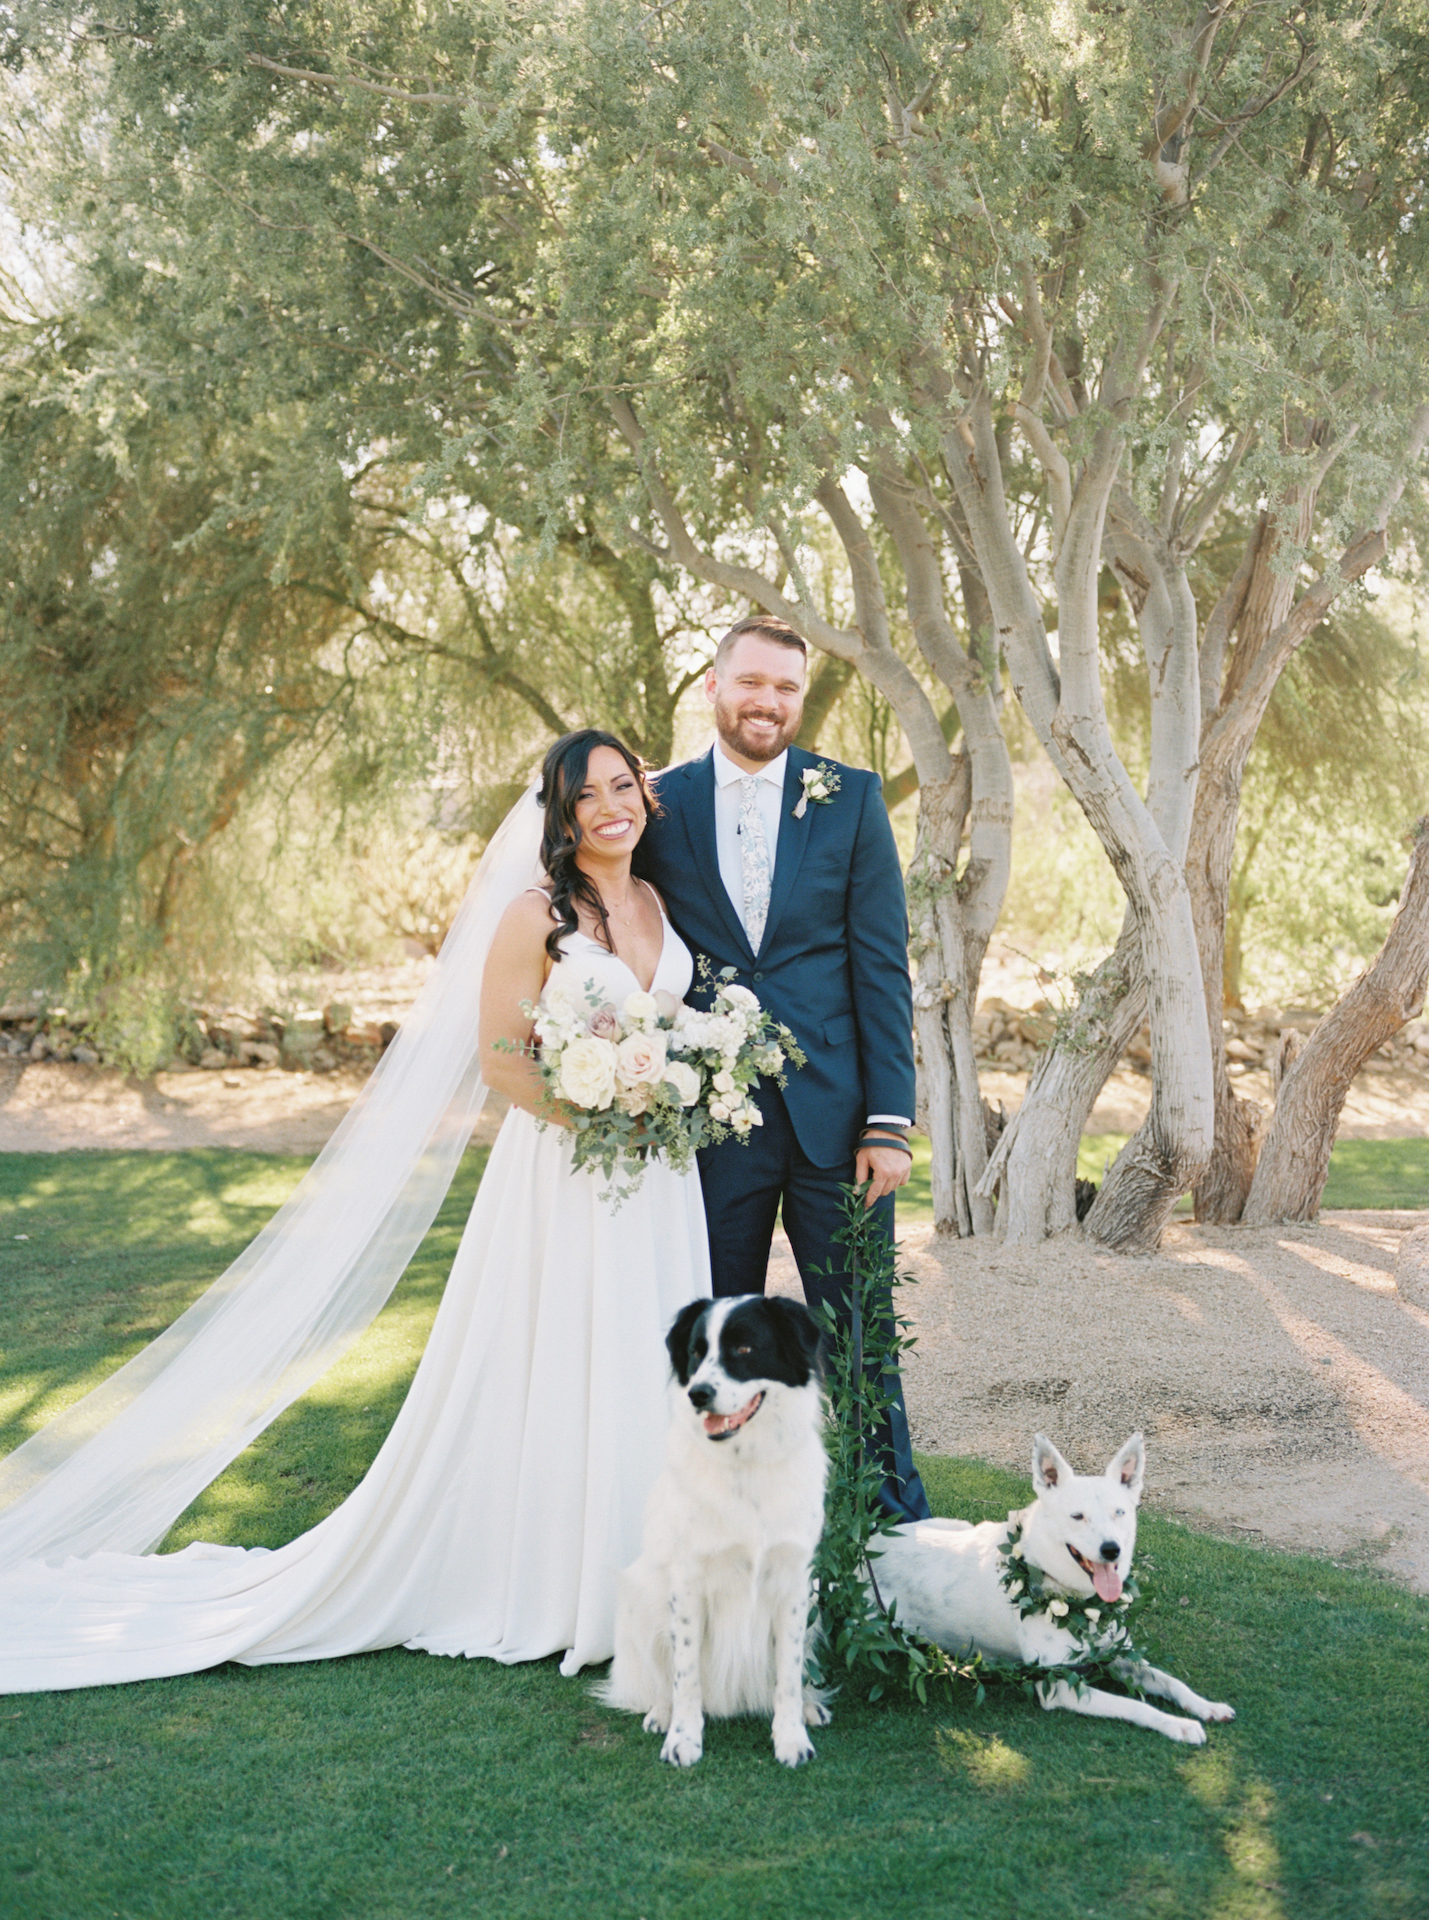 Bride and groom standing in grass with desert landscape behind them, smiling while holding two dogs on leashes and bride holding a bouquet.